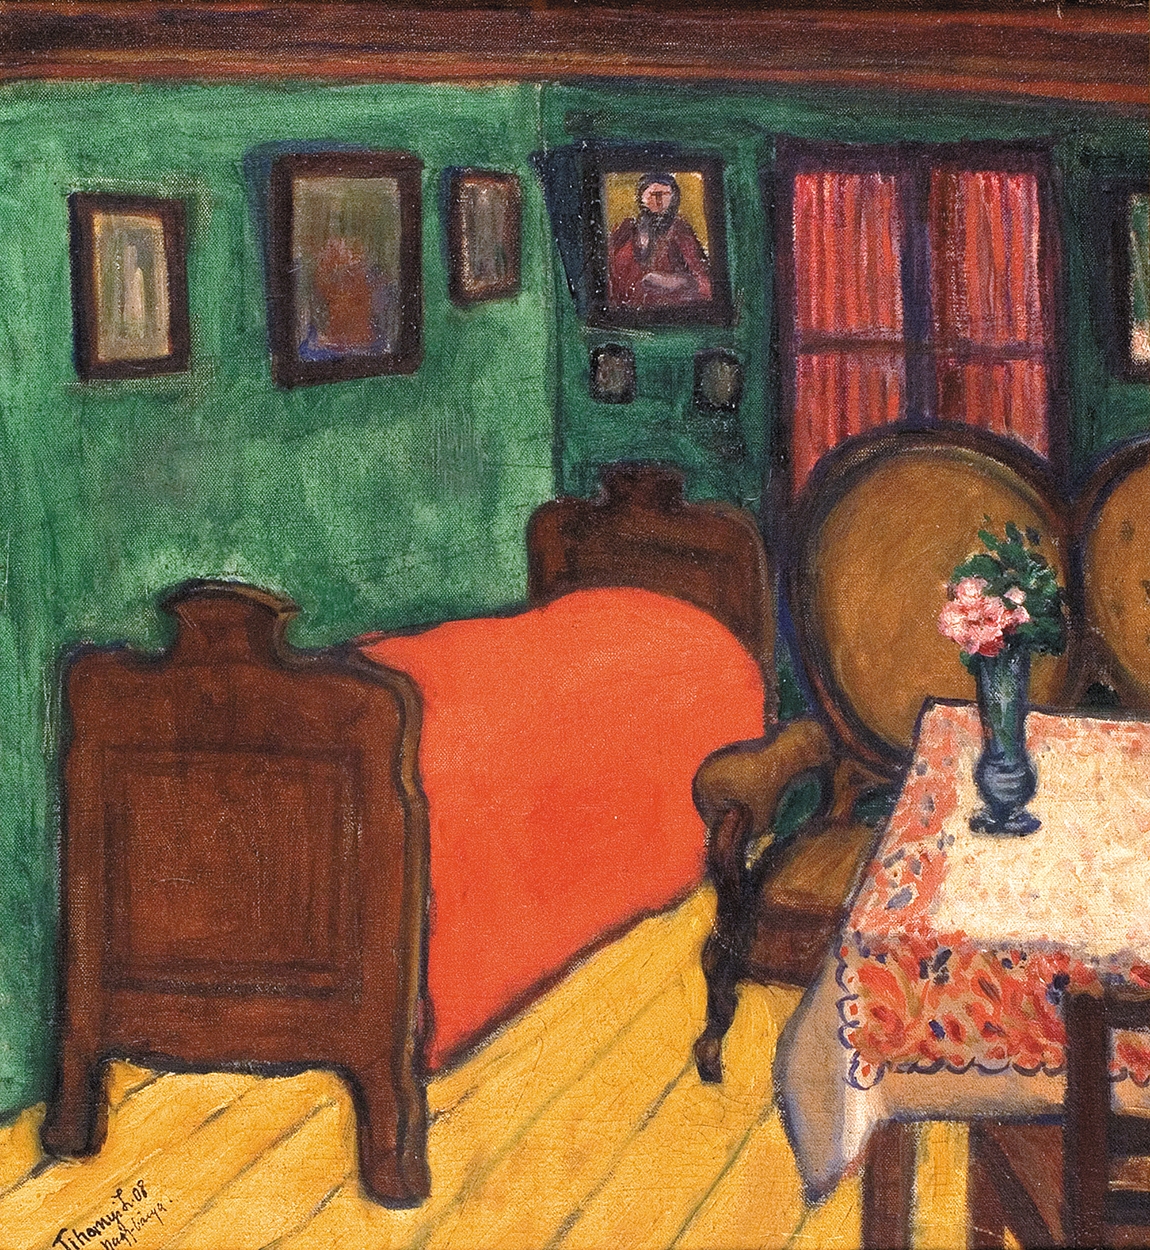 Tihanyi Lajos (1885-1938) Intérieur (Green Room in the House of Mátyás Minich), 1908